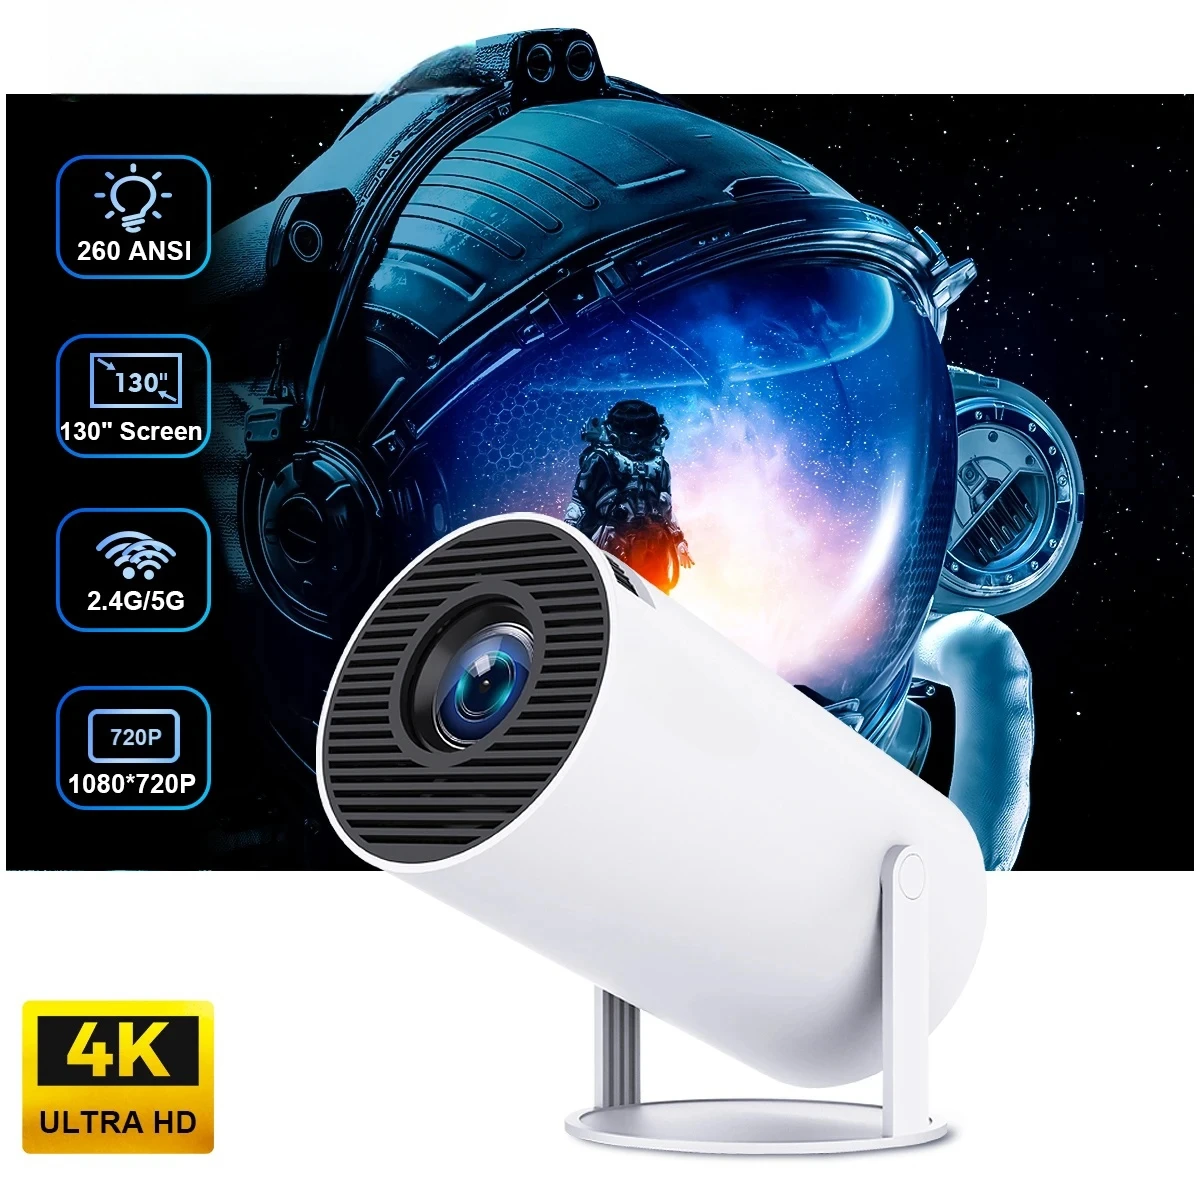 HY300 Pro Projector Android 11 4K 1280*720P Dual Wifi 260ANSI Flexible BT5.0 Cinema Outdoor Portable Indoor Projetor with Bag